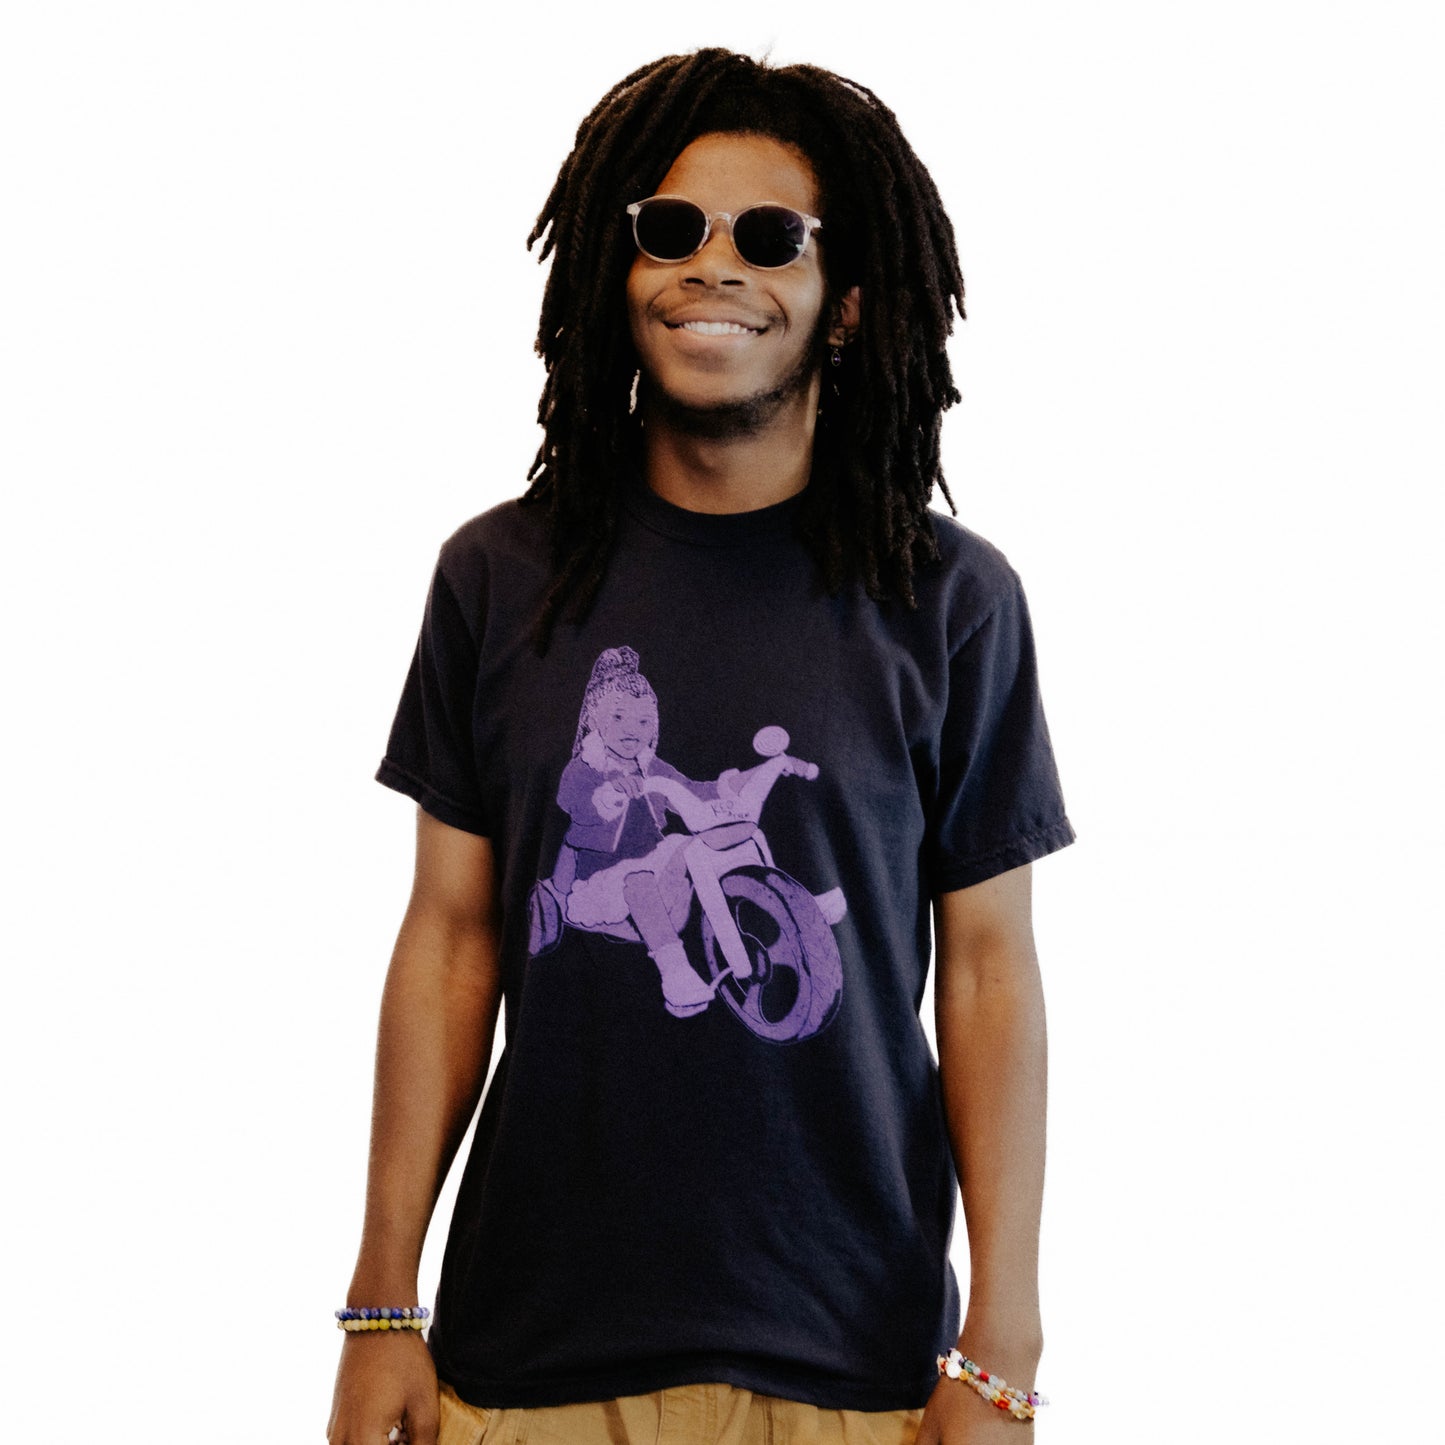 Money Grooves - Tricycle T-Shirt - Black w/ Purple